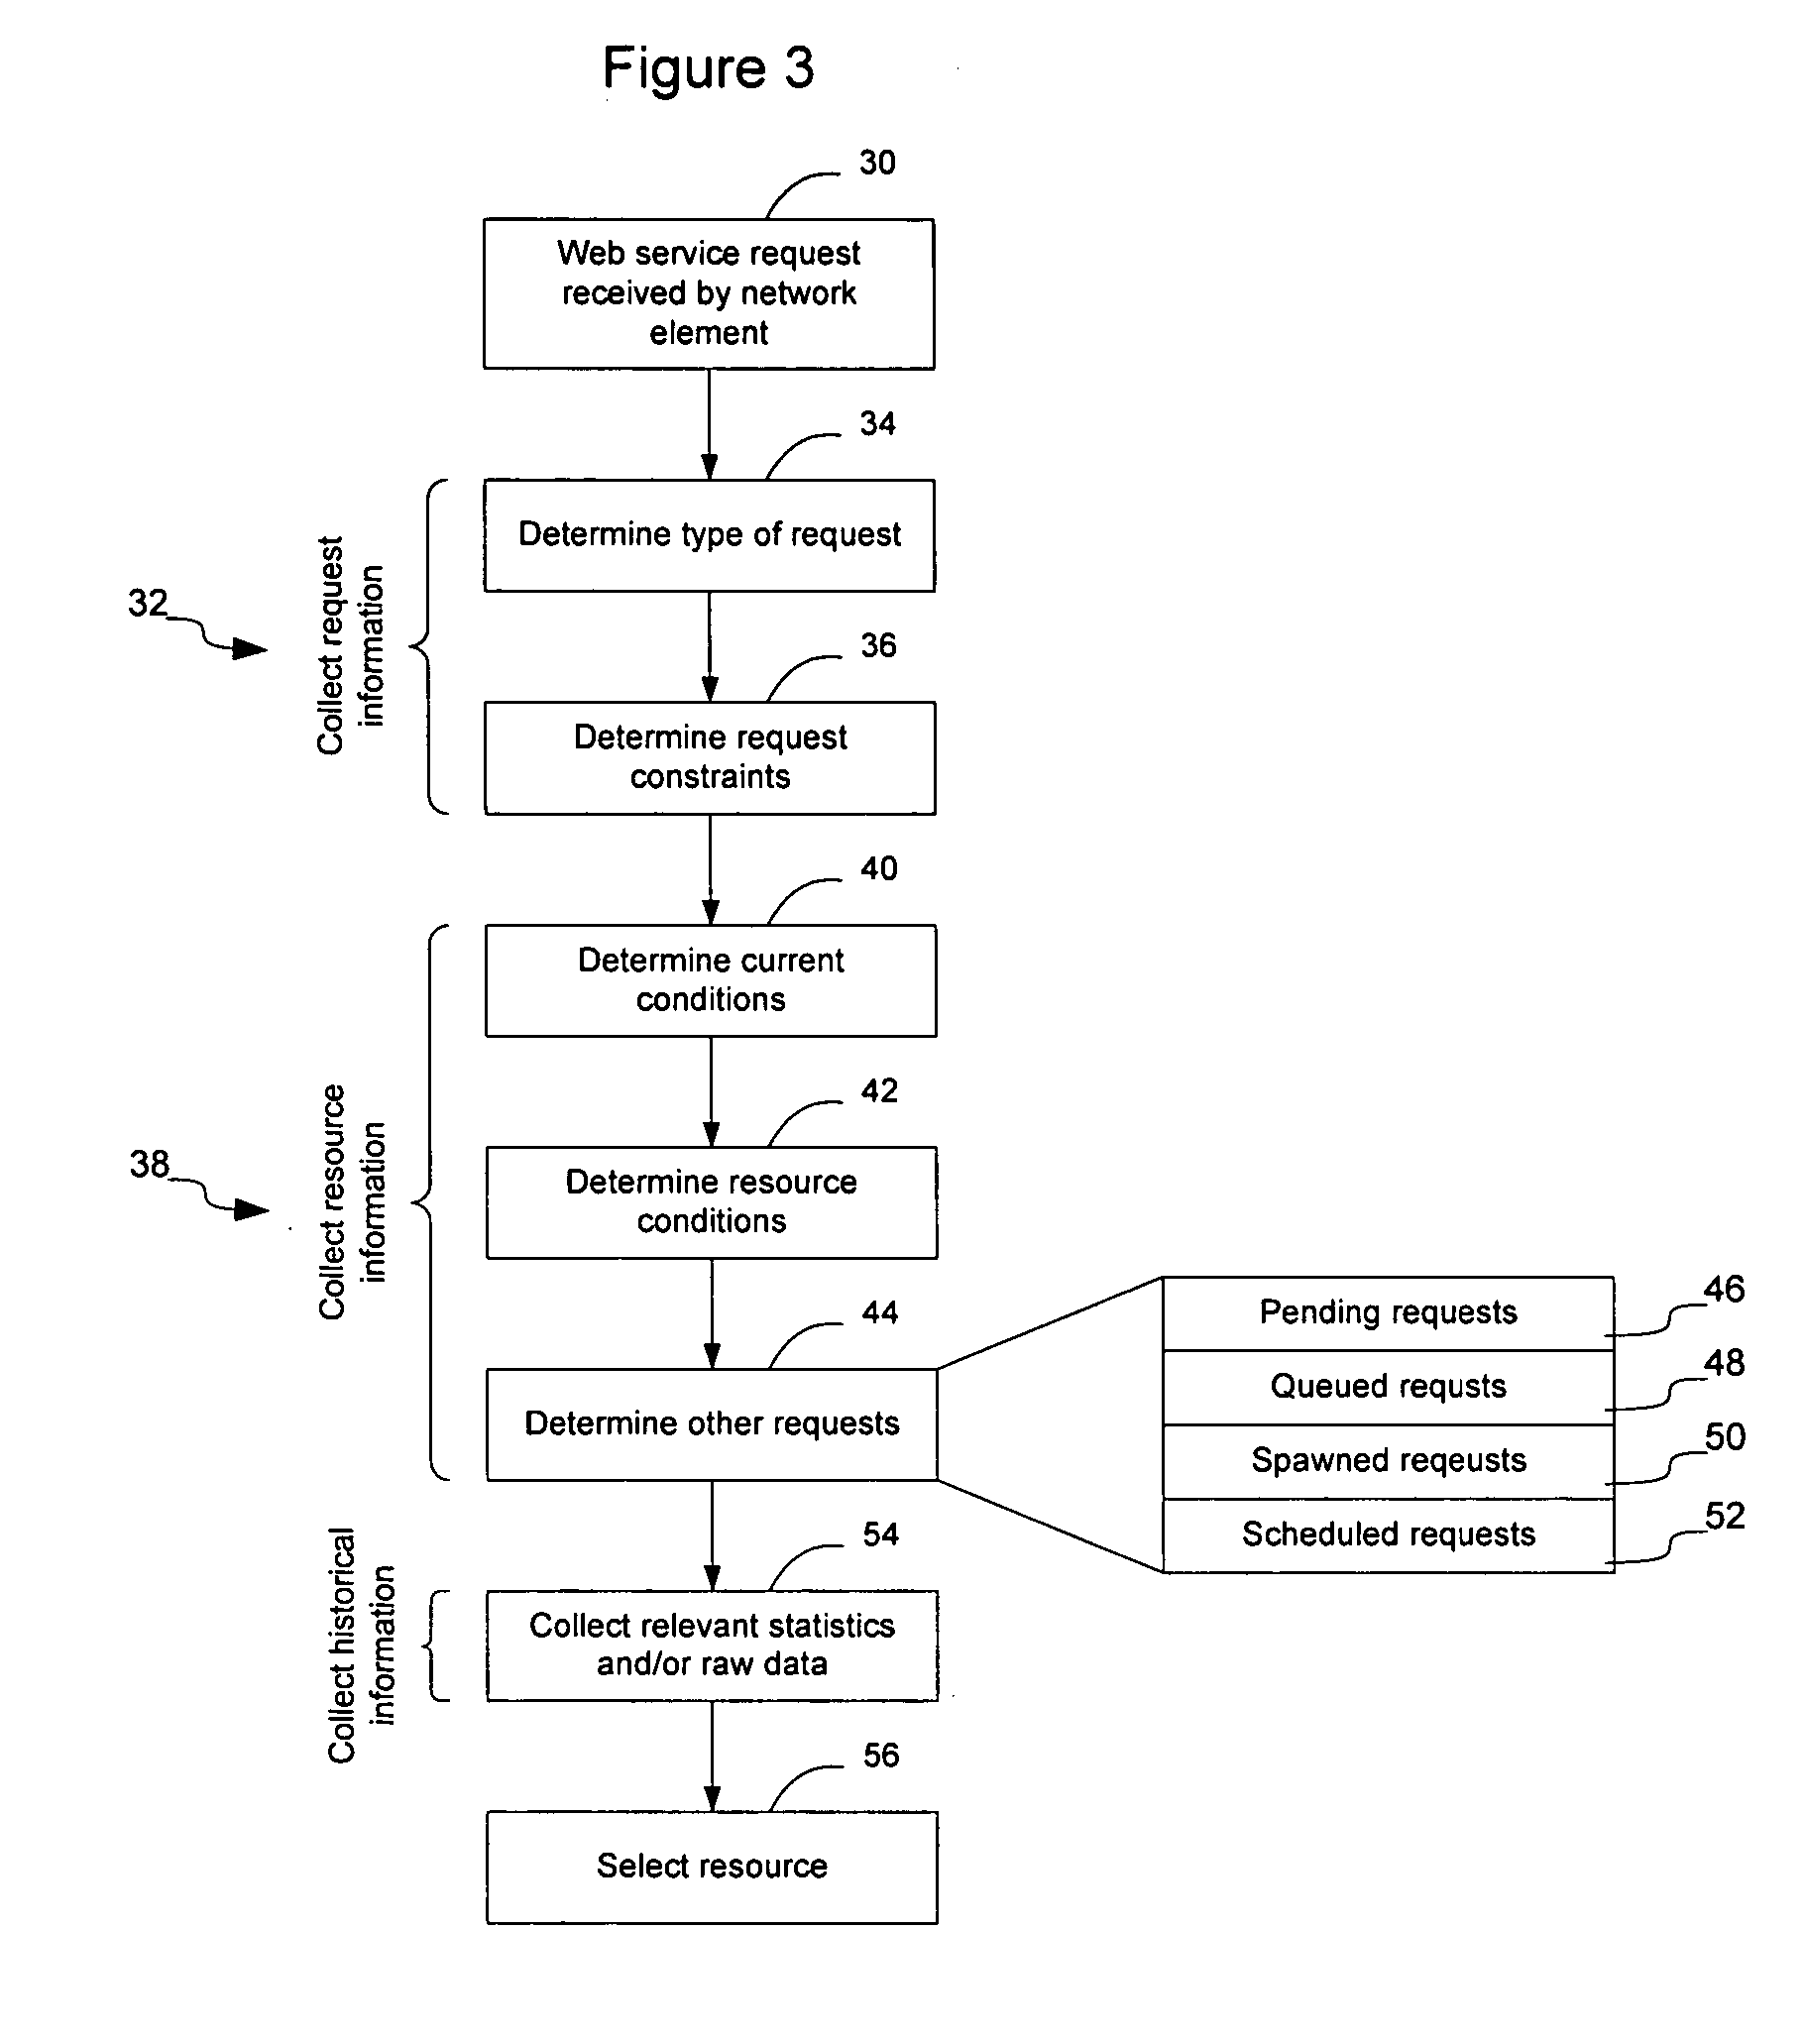 Method and apparatus for facilitating fulfillment of web-service requests on a communication network